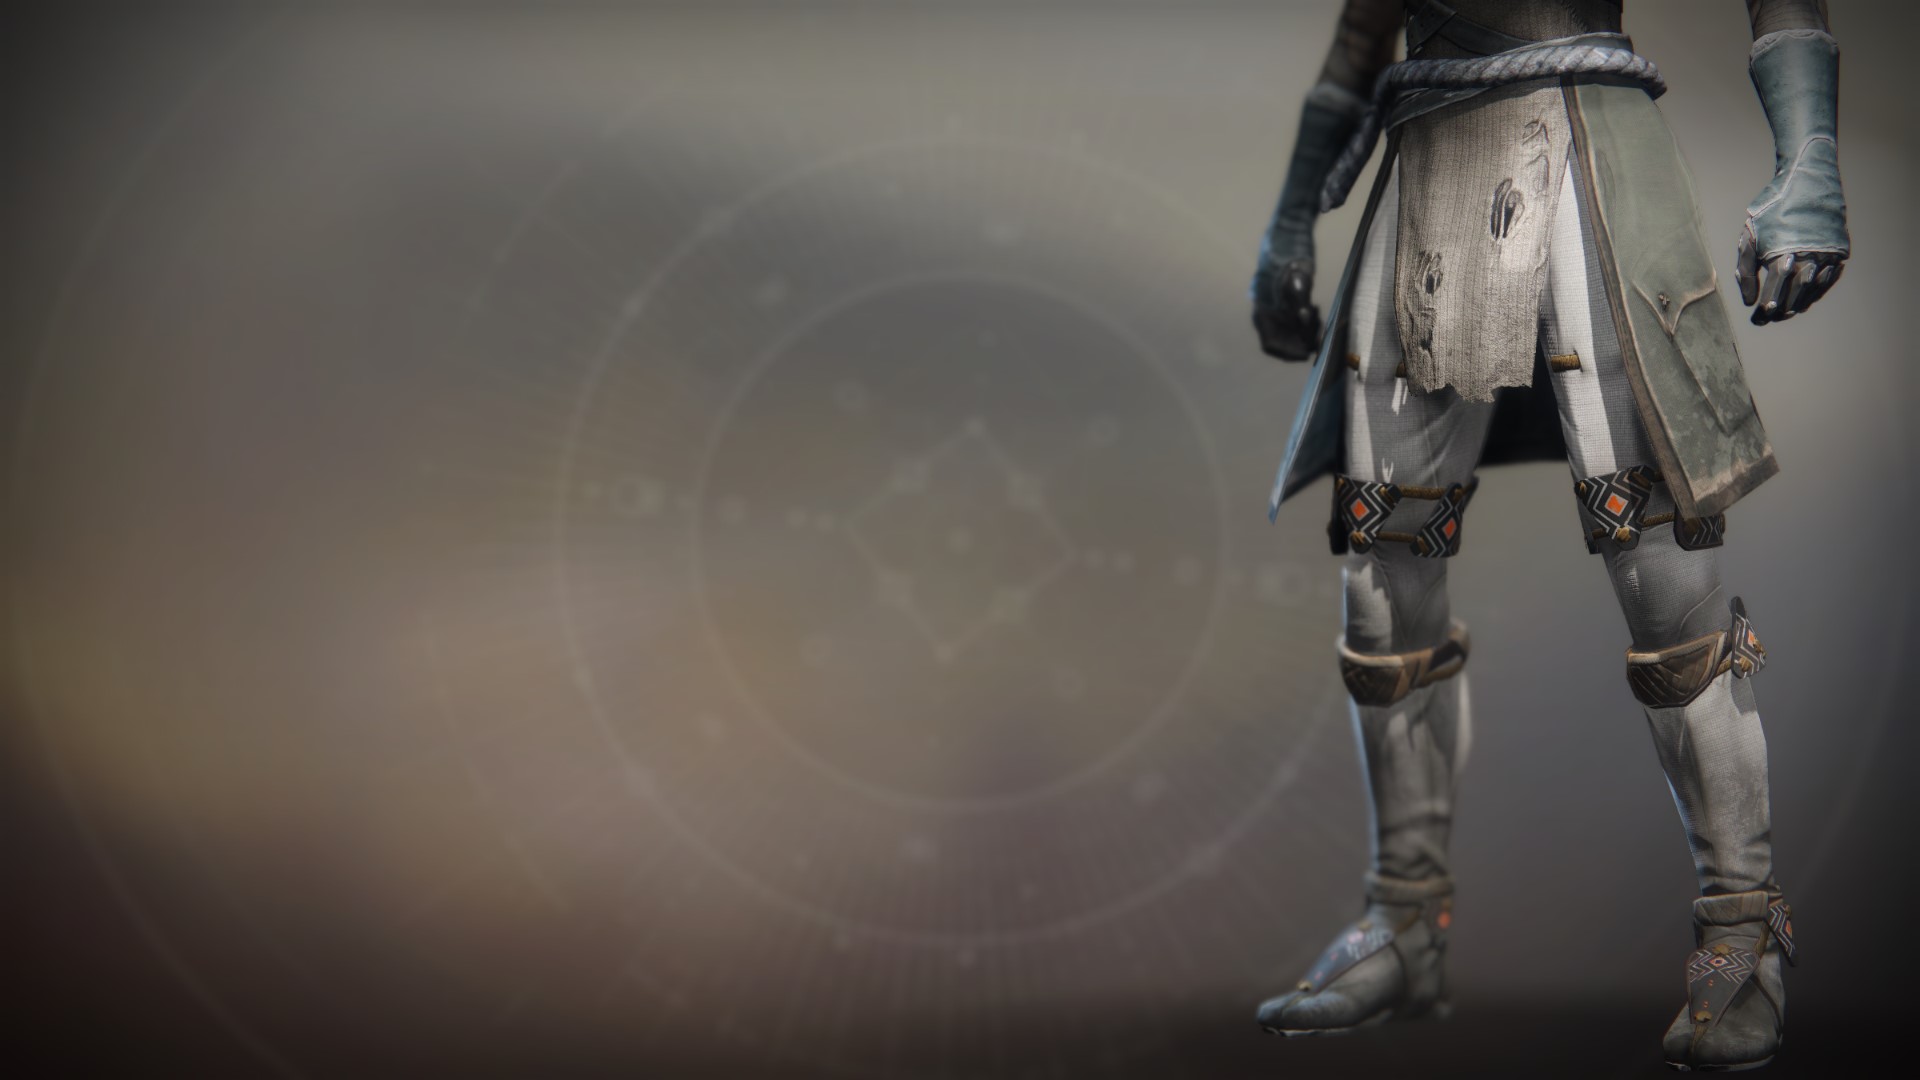 An in-game render of the Lunafaction Boots.